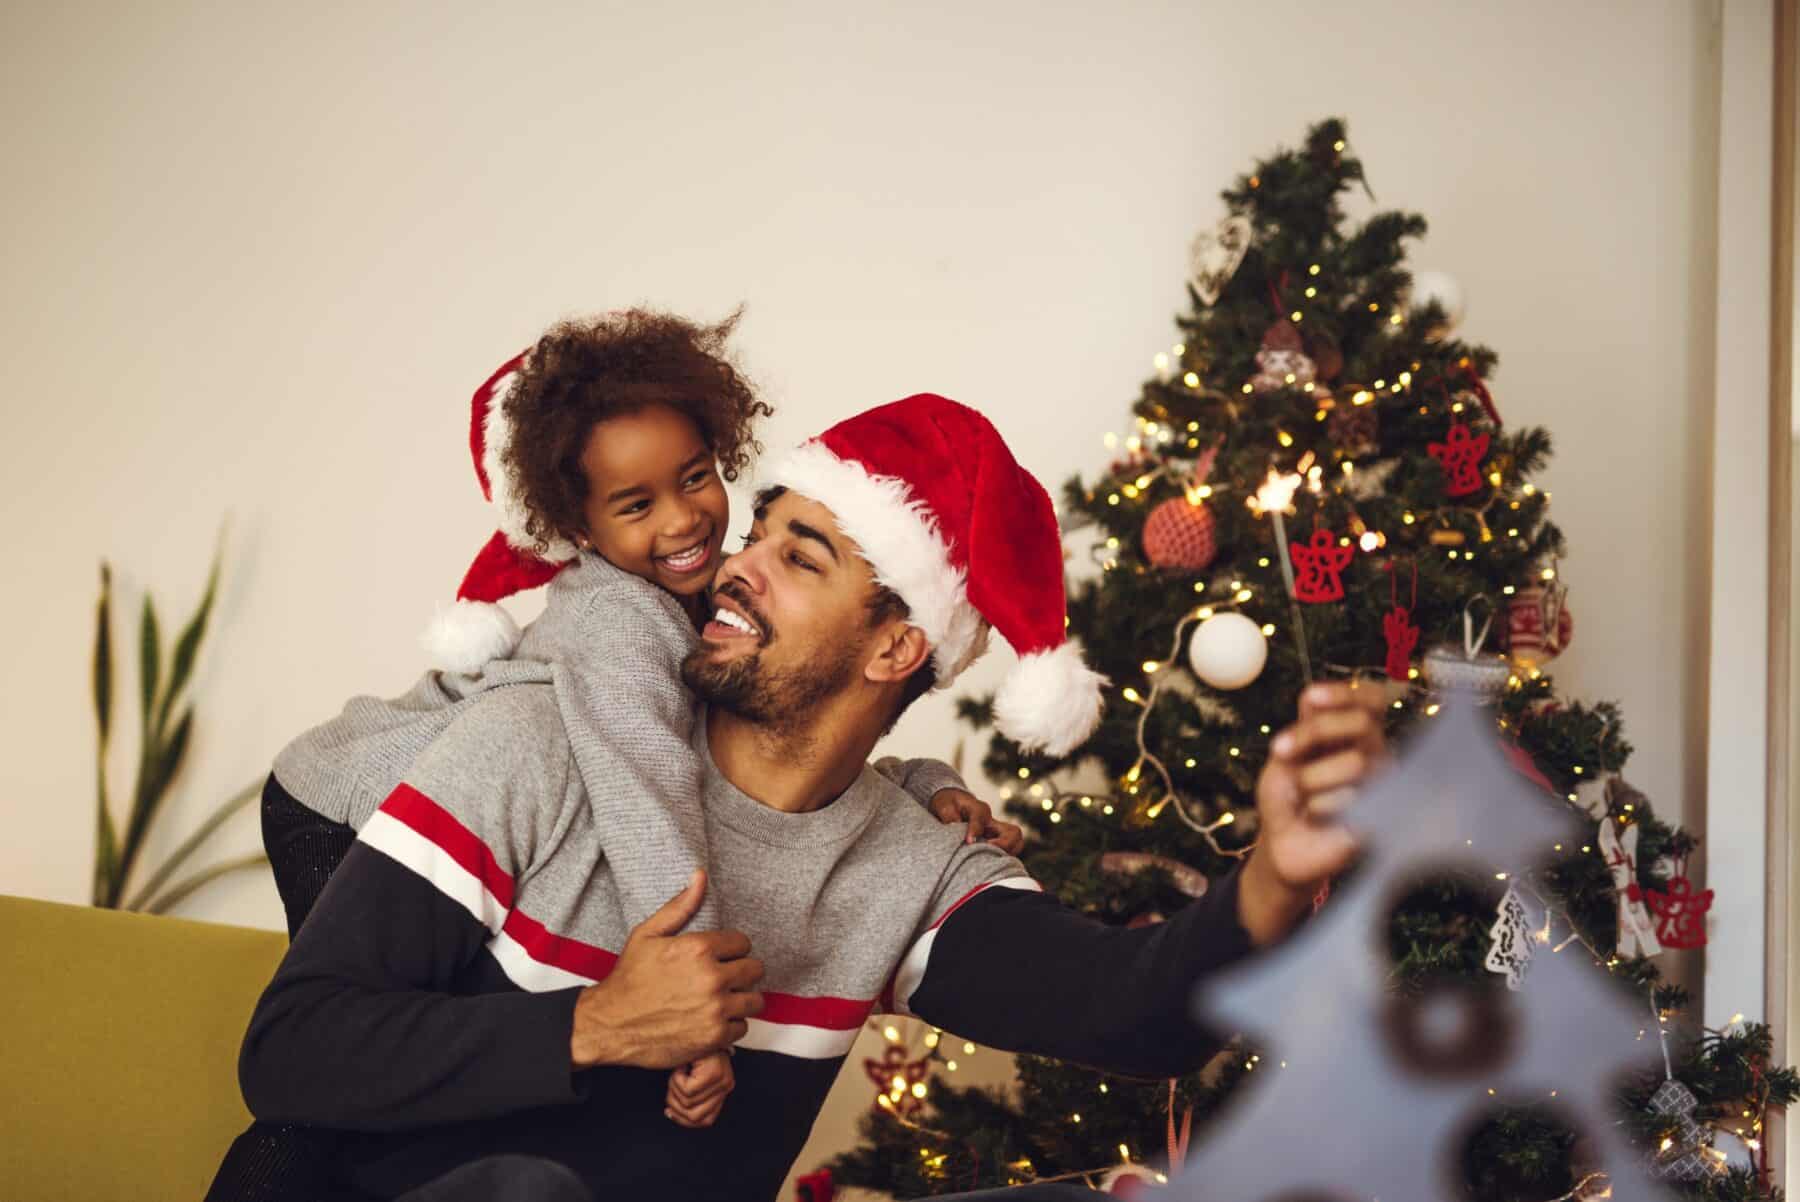 Cute african american girl decorating Christmas tree with dad.